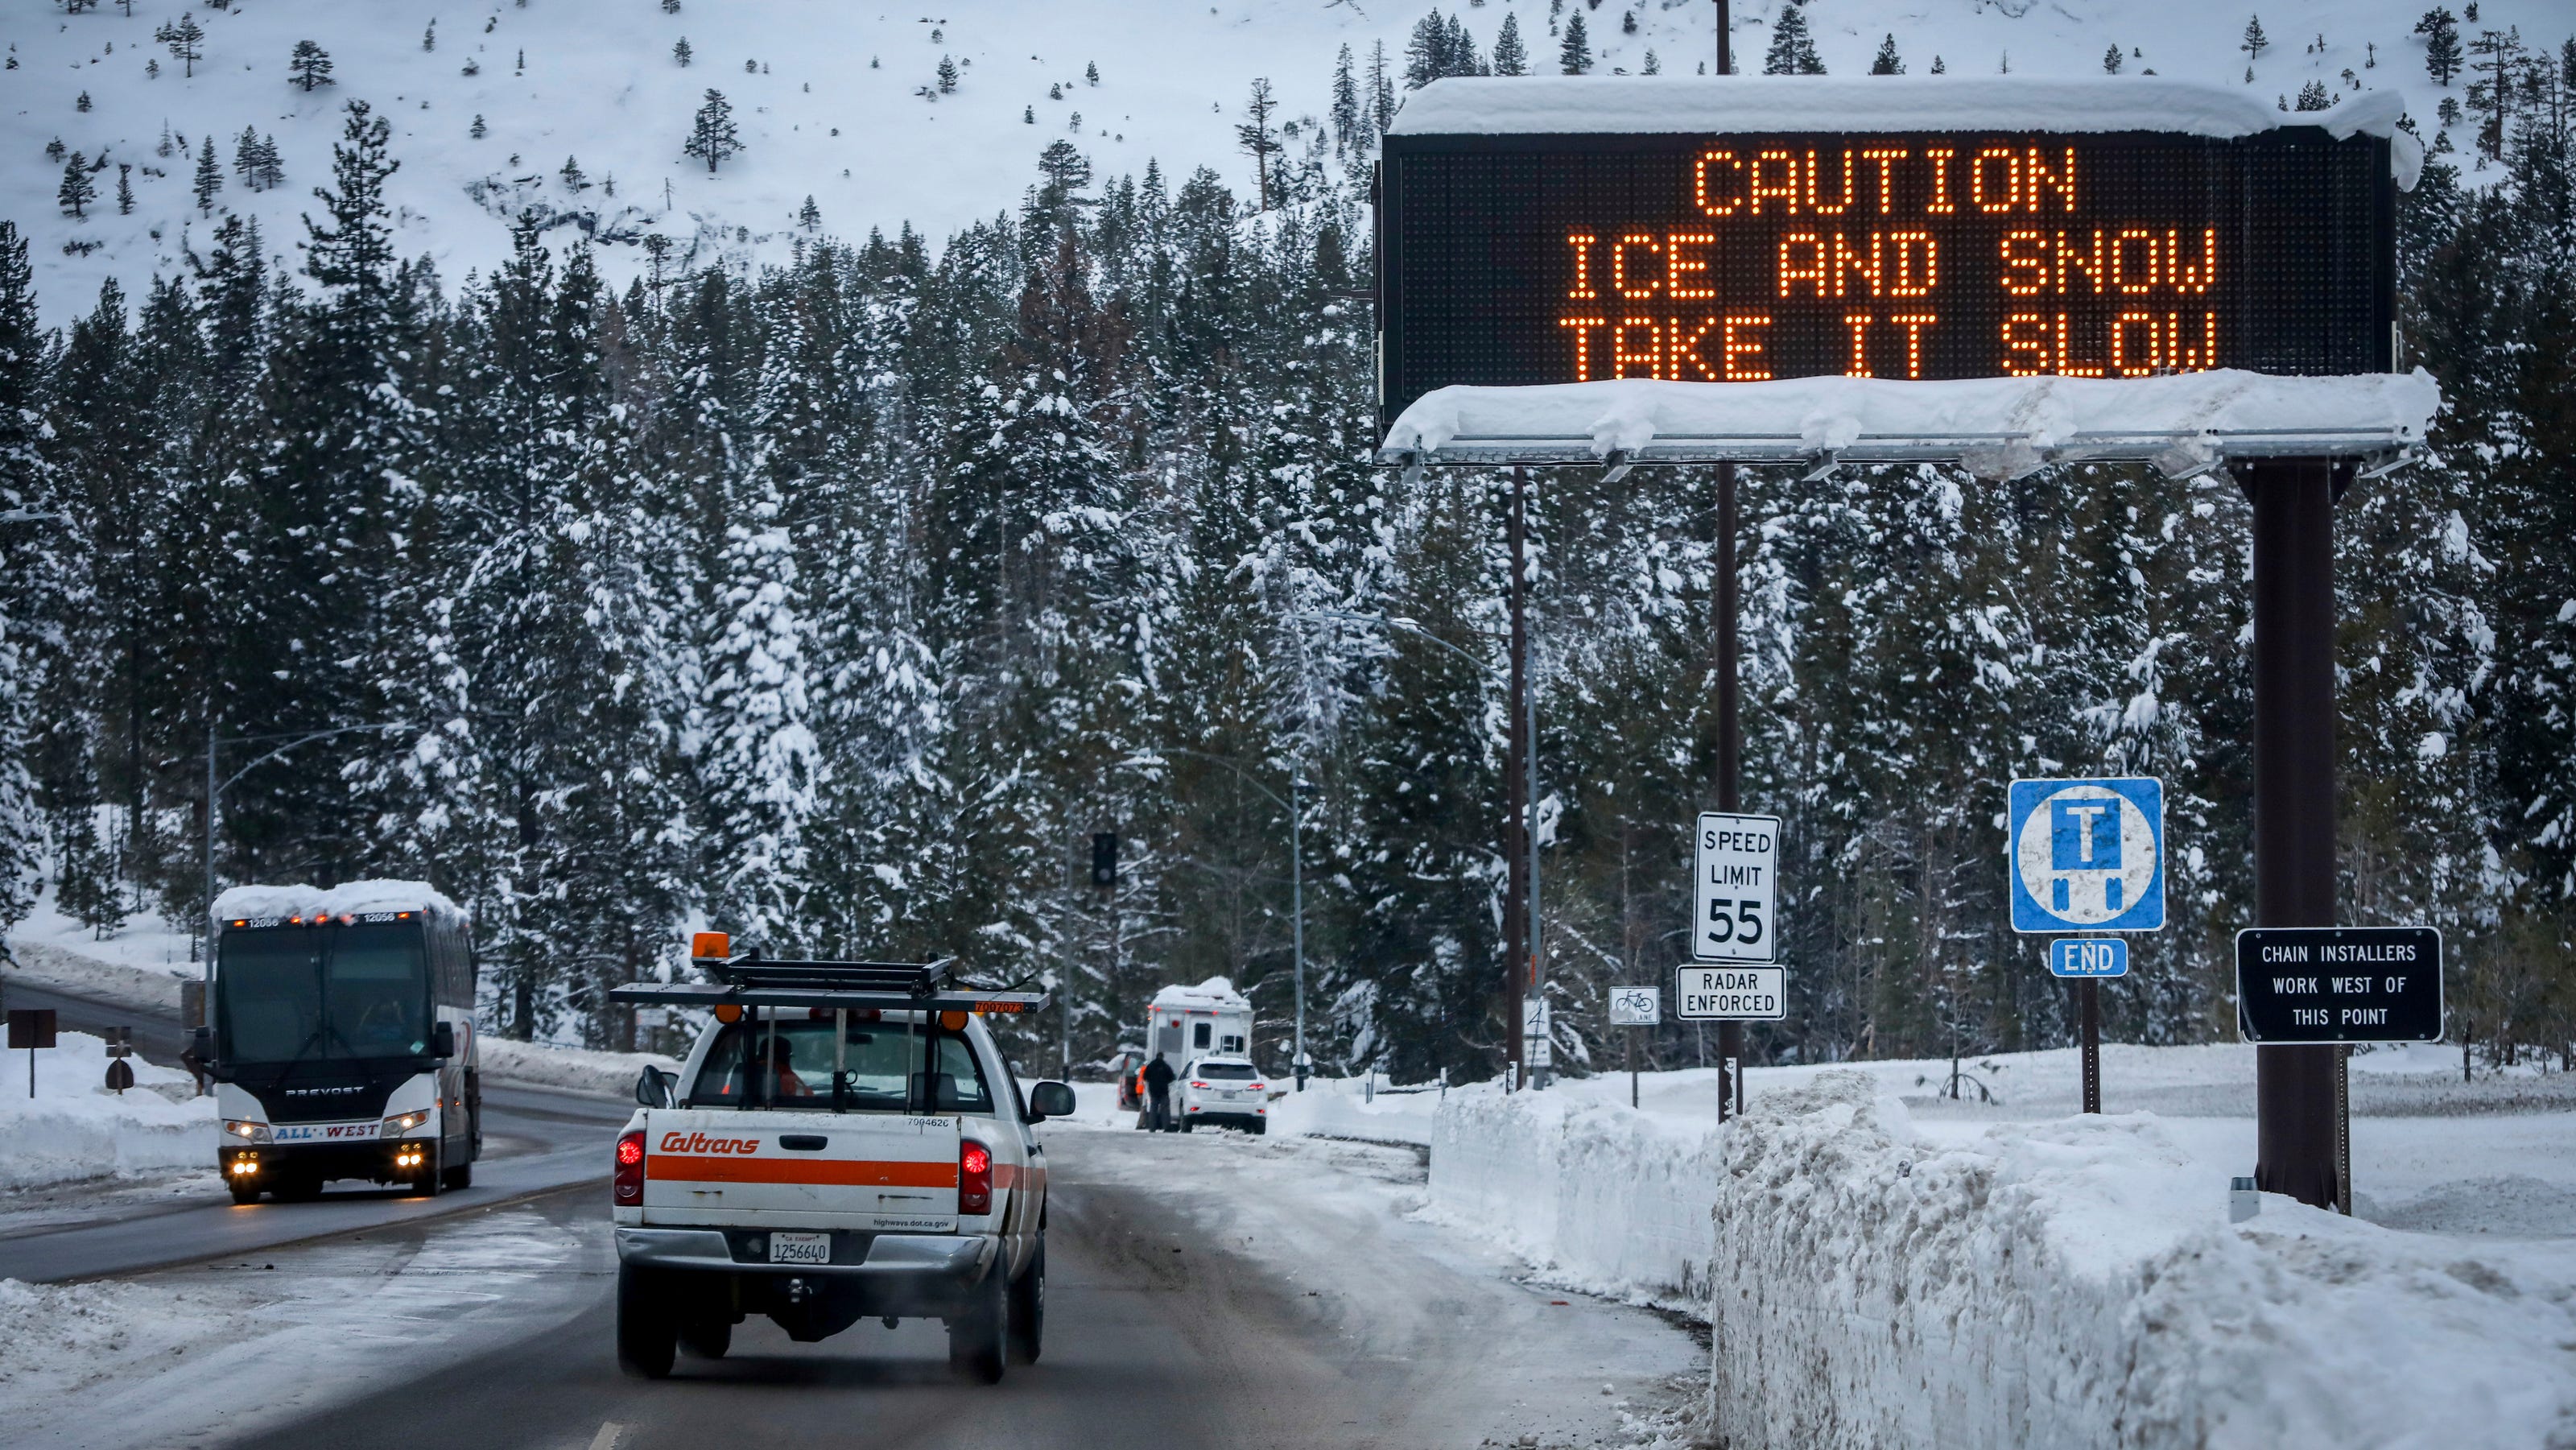 How much snow in California? Why massive mountain snow helps ... - USA TODAY